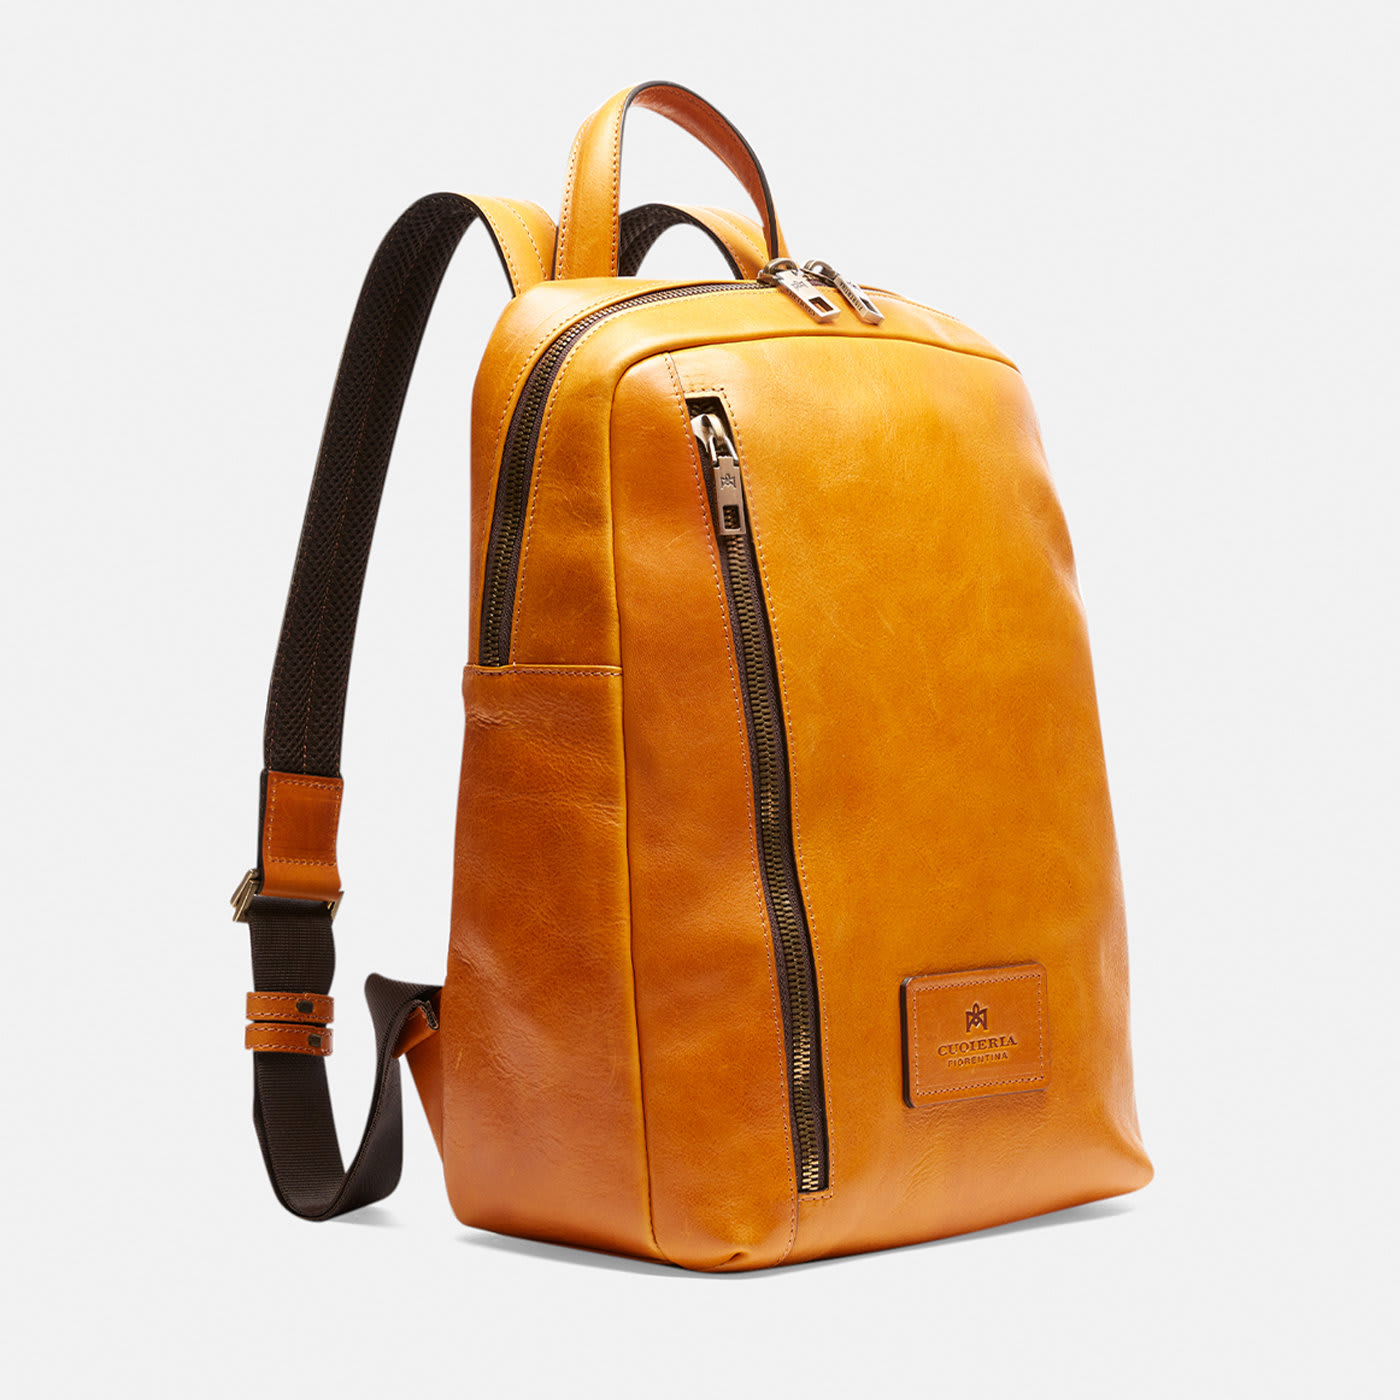 Tokyo Soft Leather Backpack - Cuoieria Fiorentina